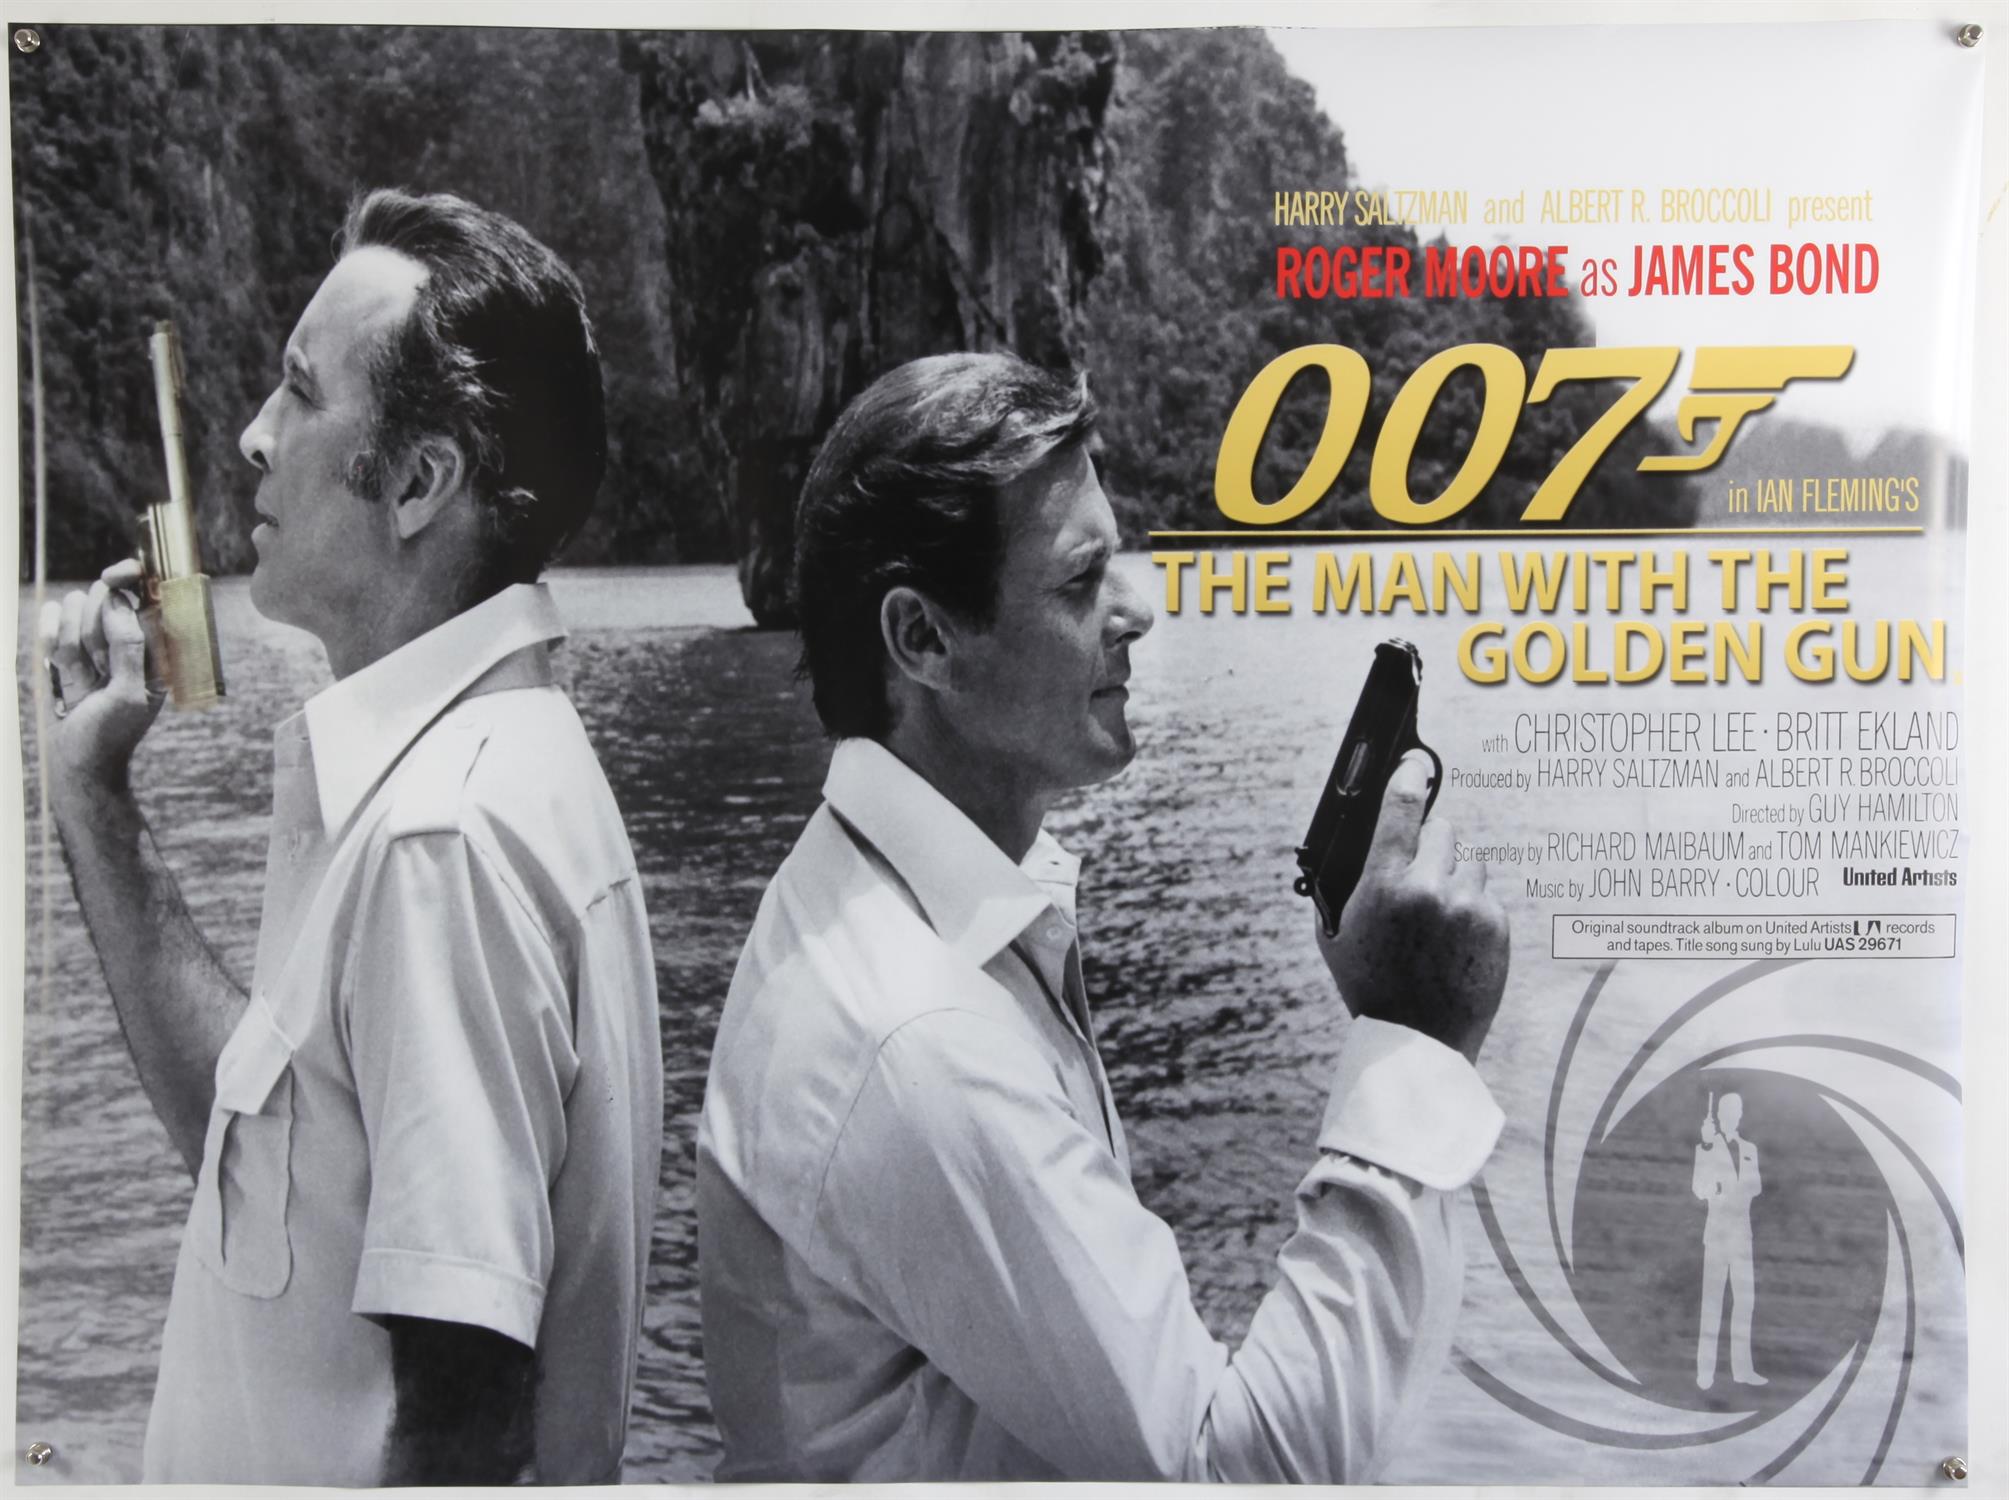 James Bond The Man with the Golden Gun (2020) Commercial British Quad film poster, rolled,